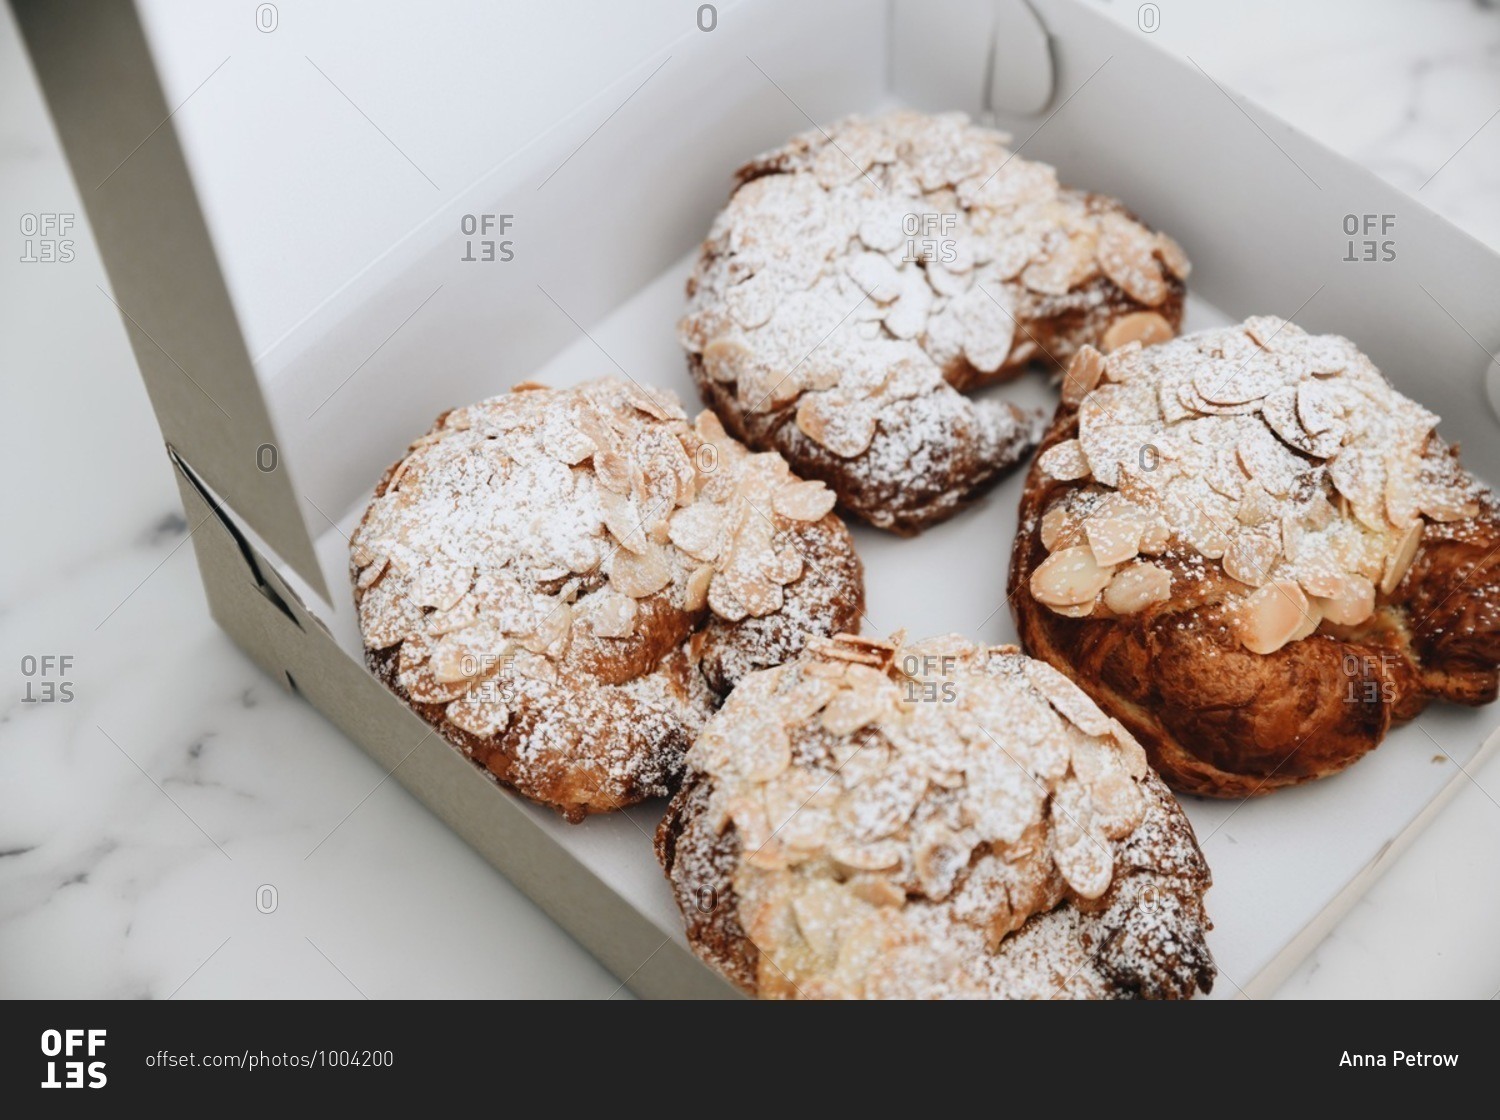 Almond pastries covered in powdered sugar in a box